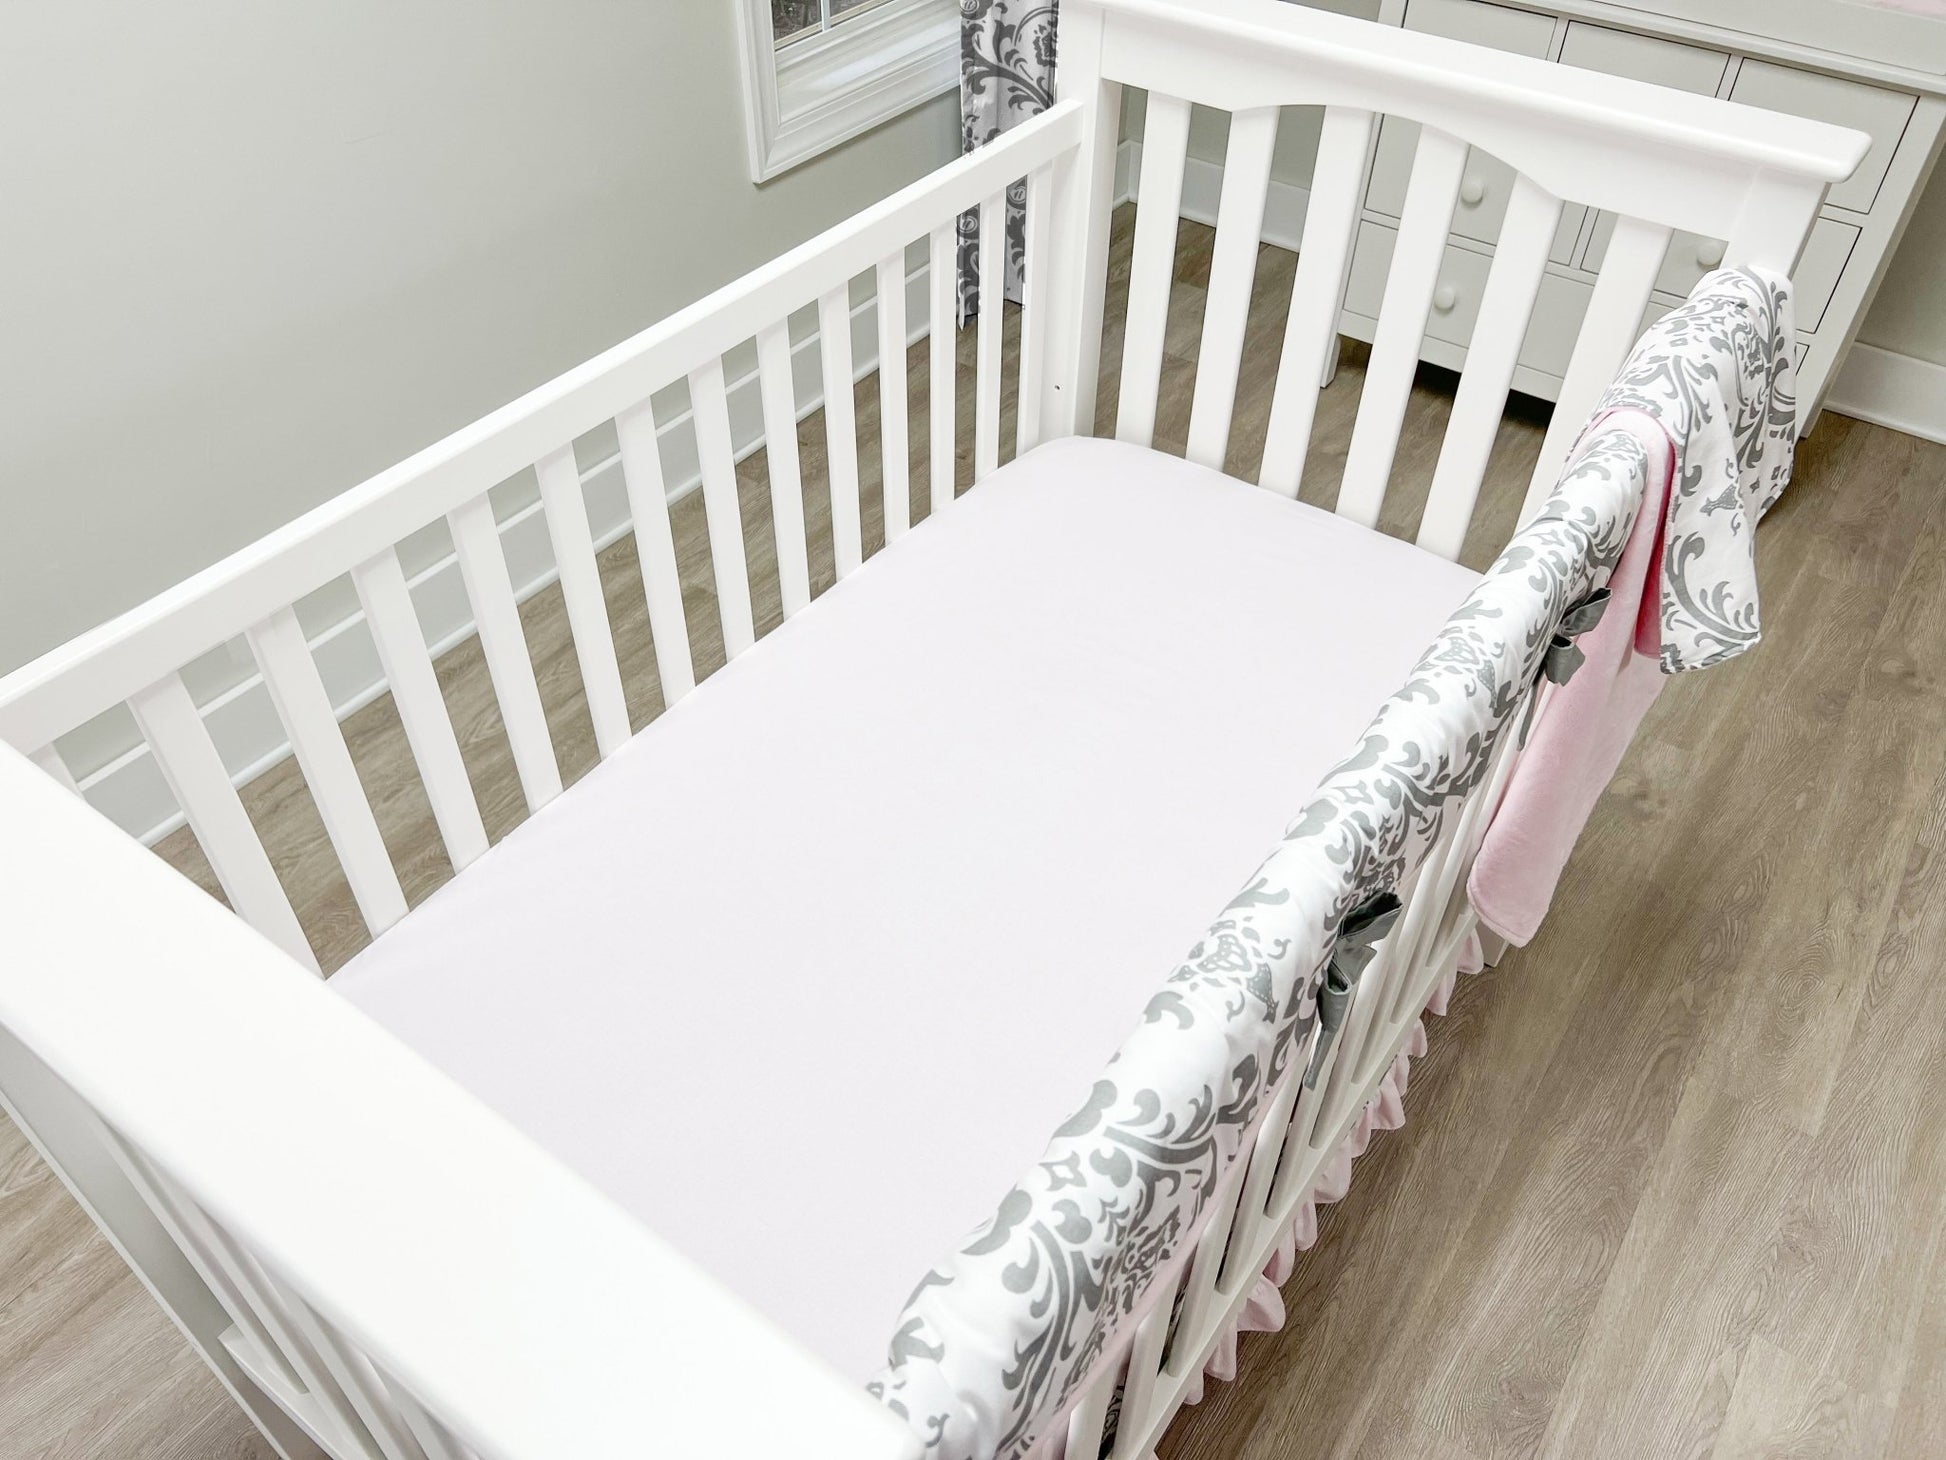 Pink and Gray Traditions Crib Bedding - 4 Piece Set - New Arrivals Inc